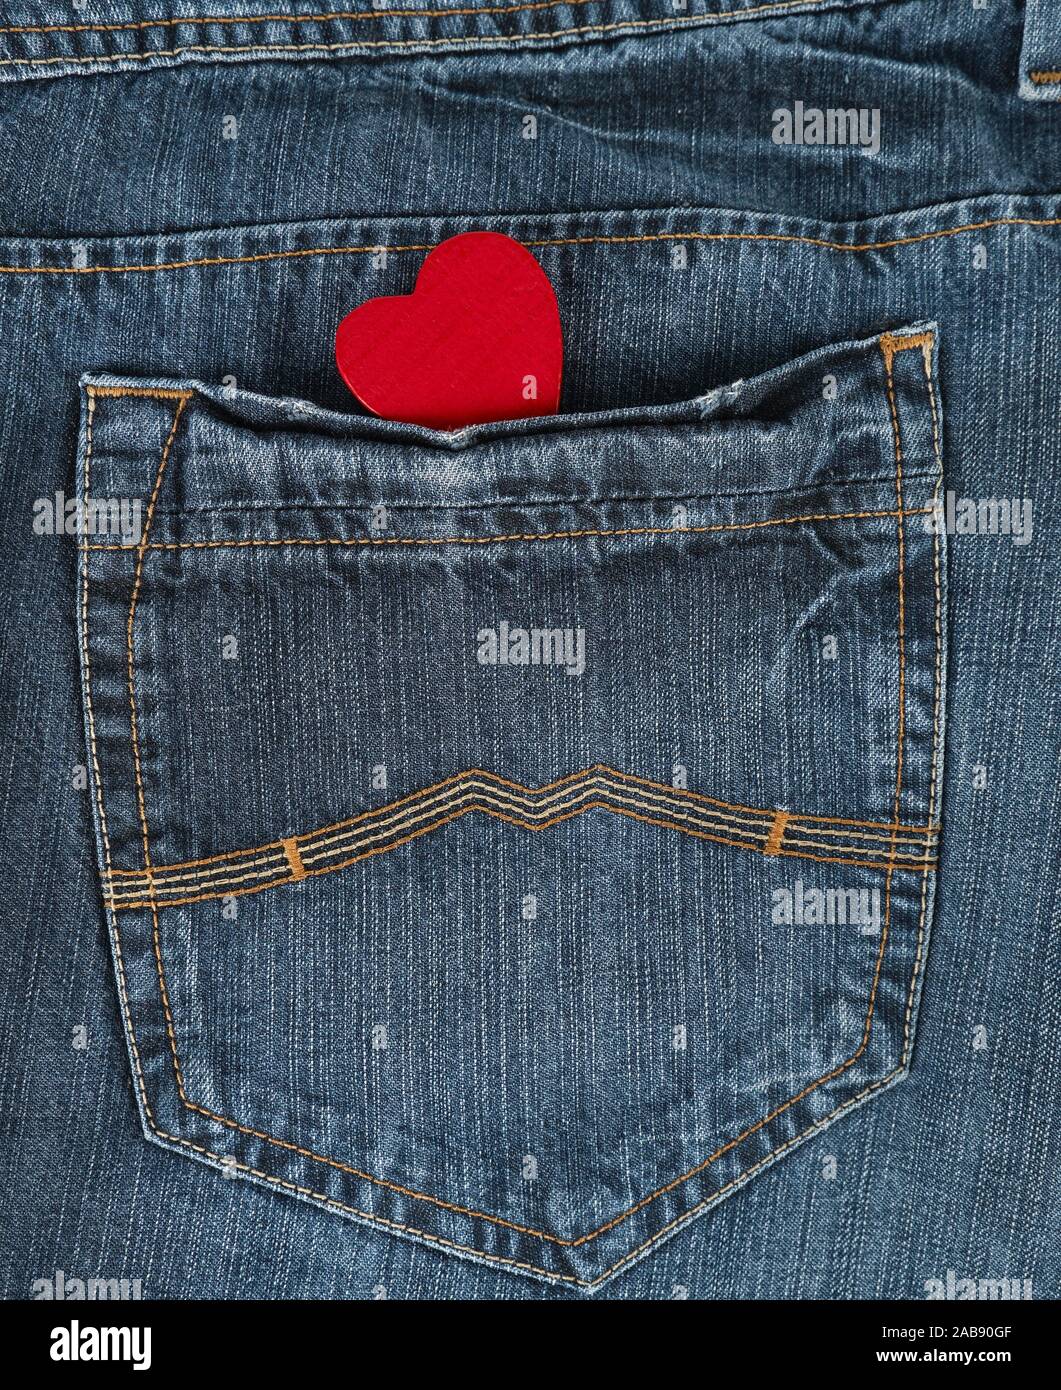 small red heart in the back pocket of blue jeans, full frame Stock Photo -  Alamy